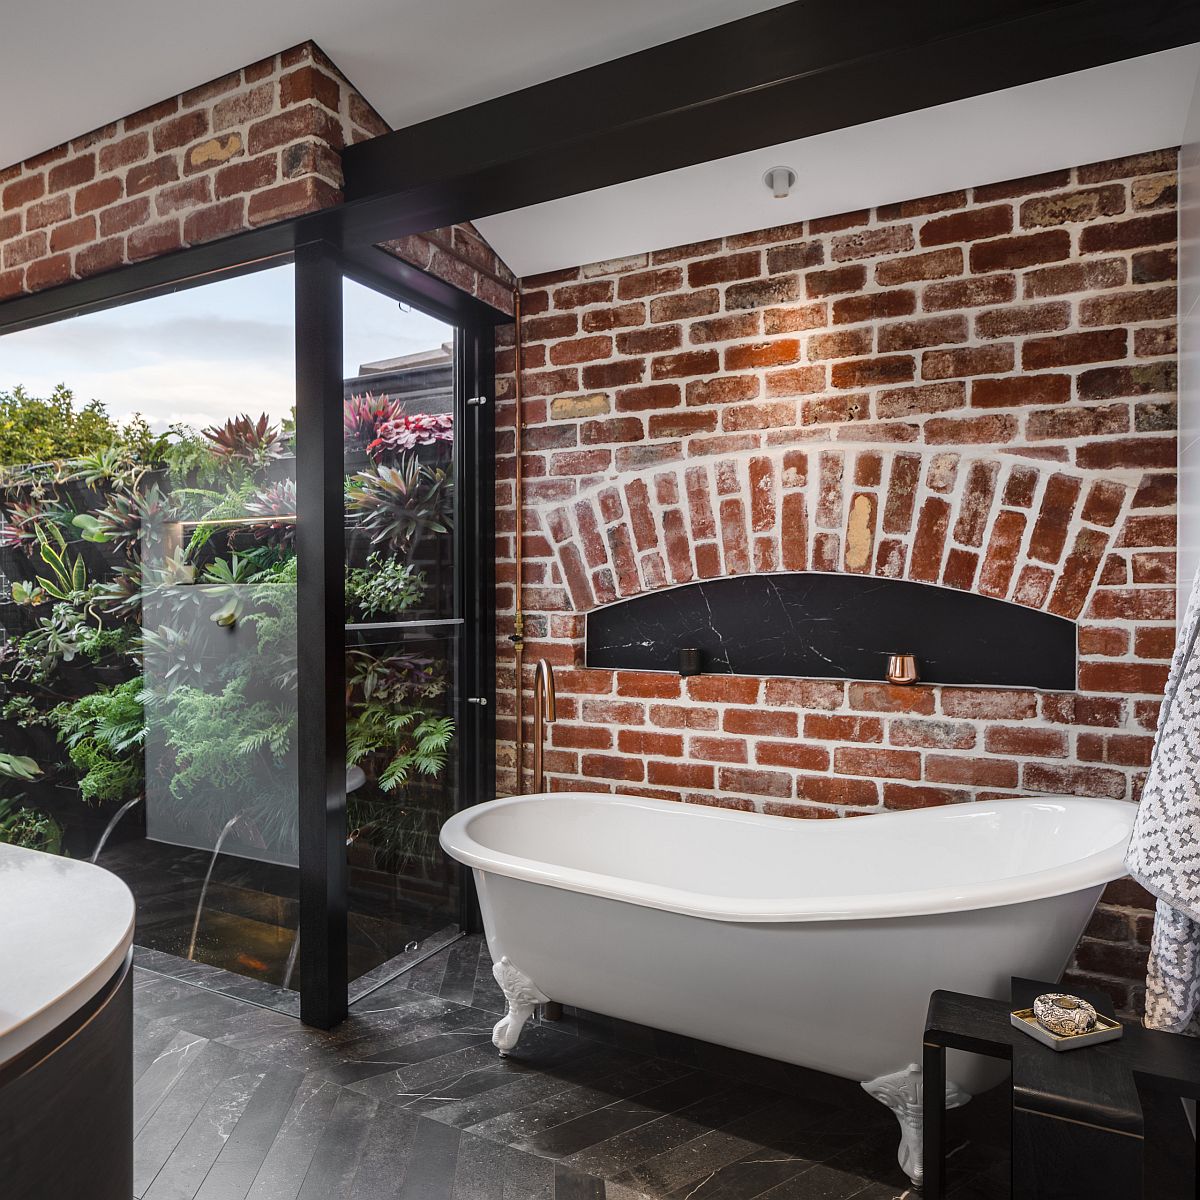 Modern-industrial-bathroom-with-a-brick-wall-backdrop-and-lovely-black-accents-55783